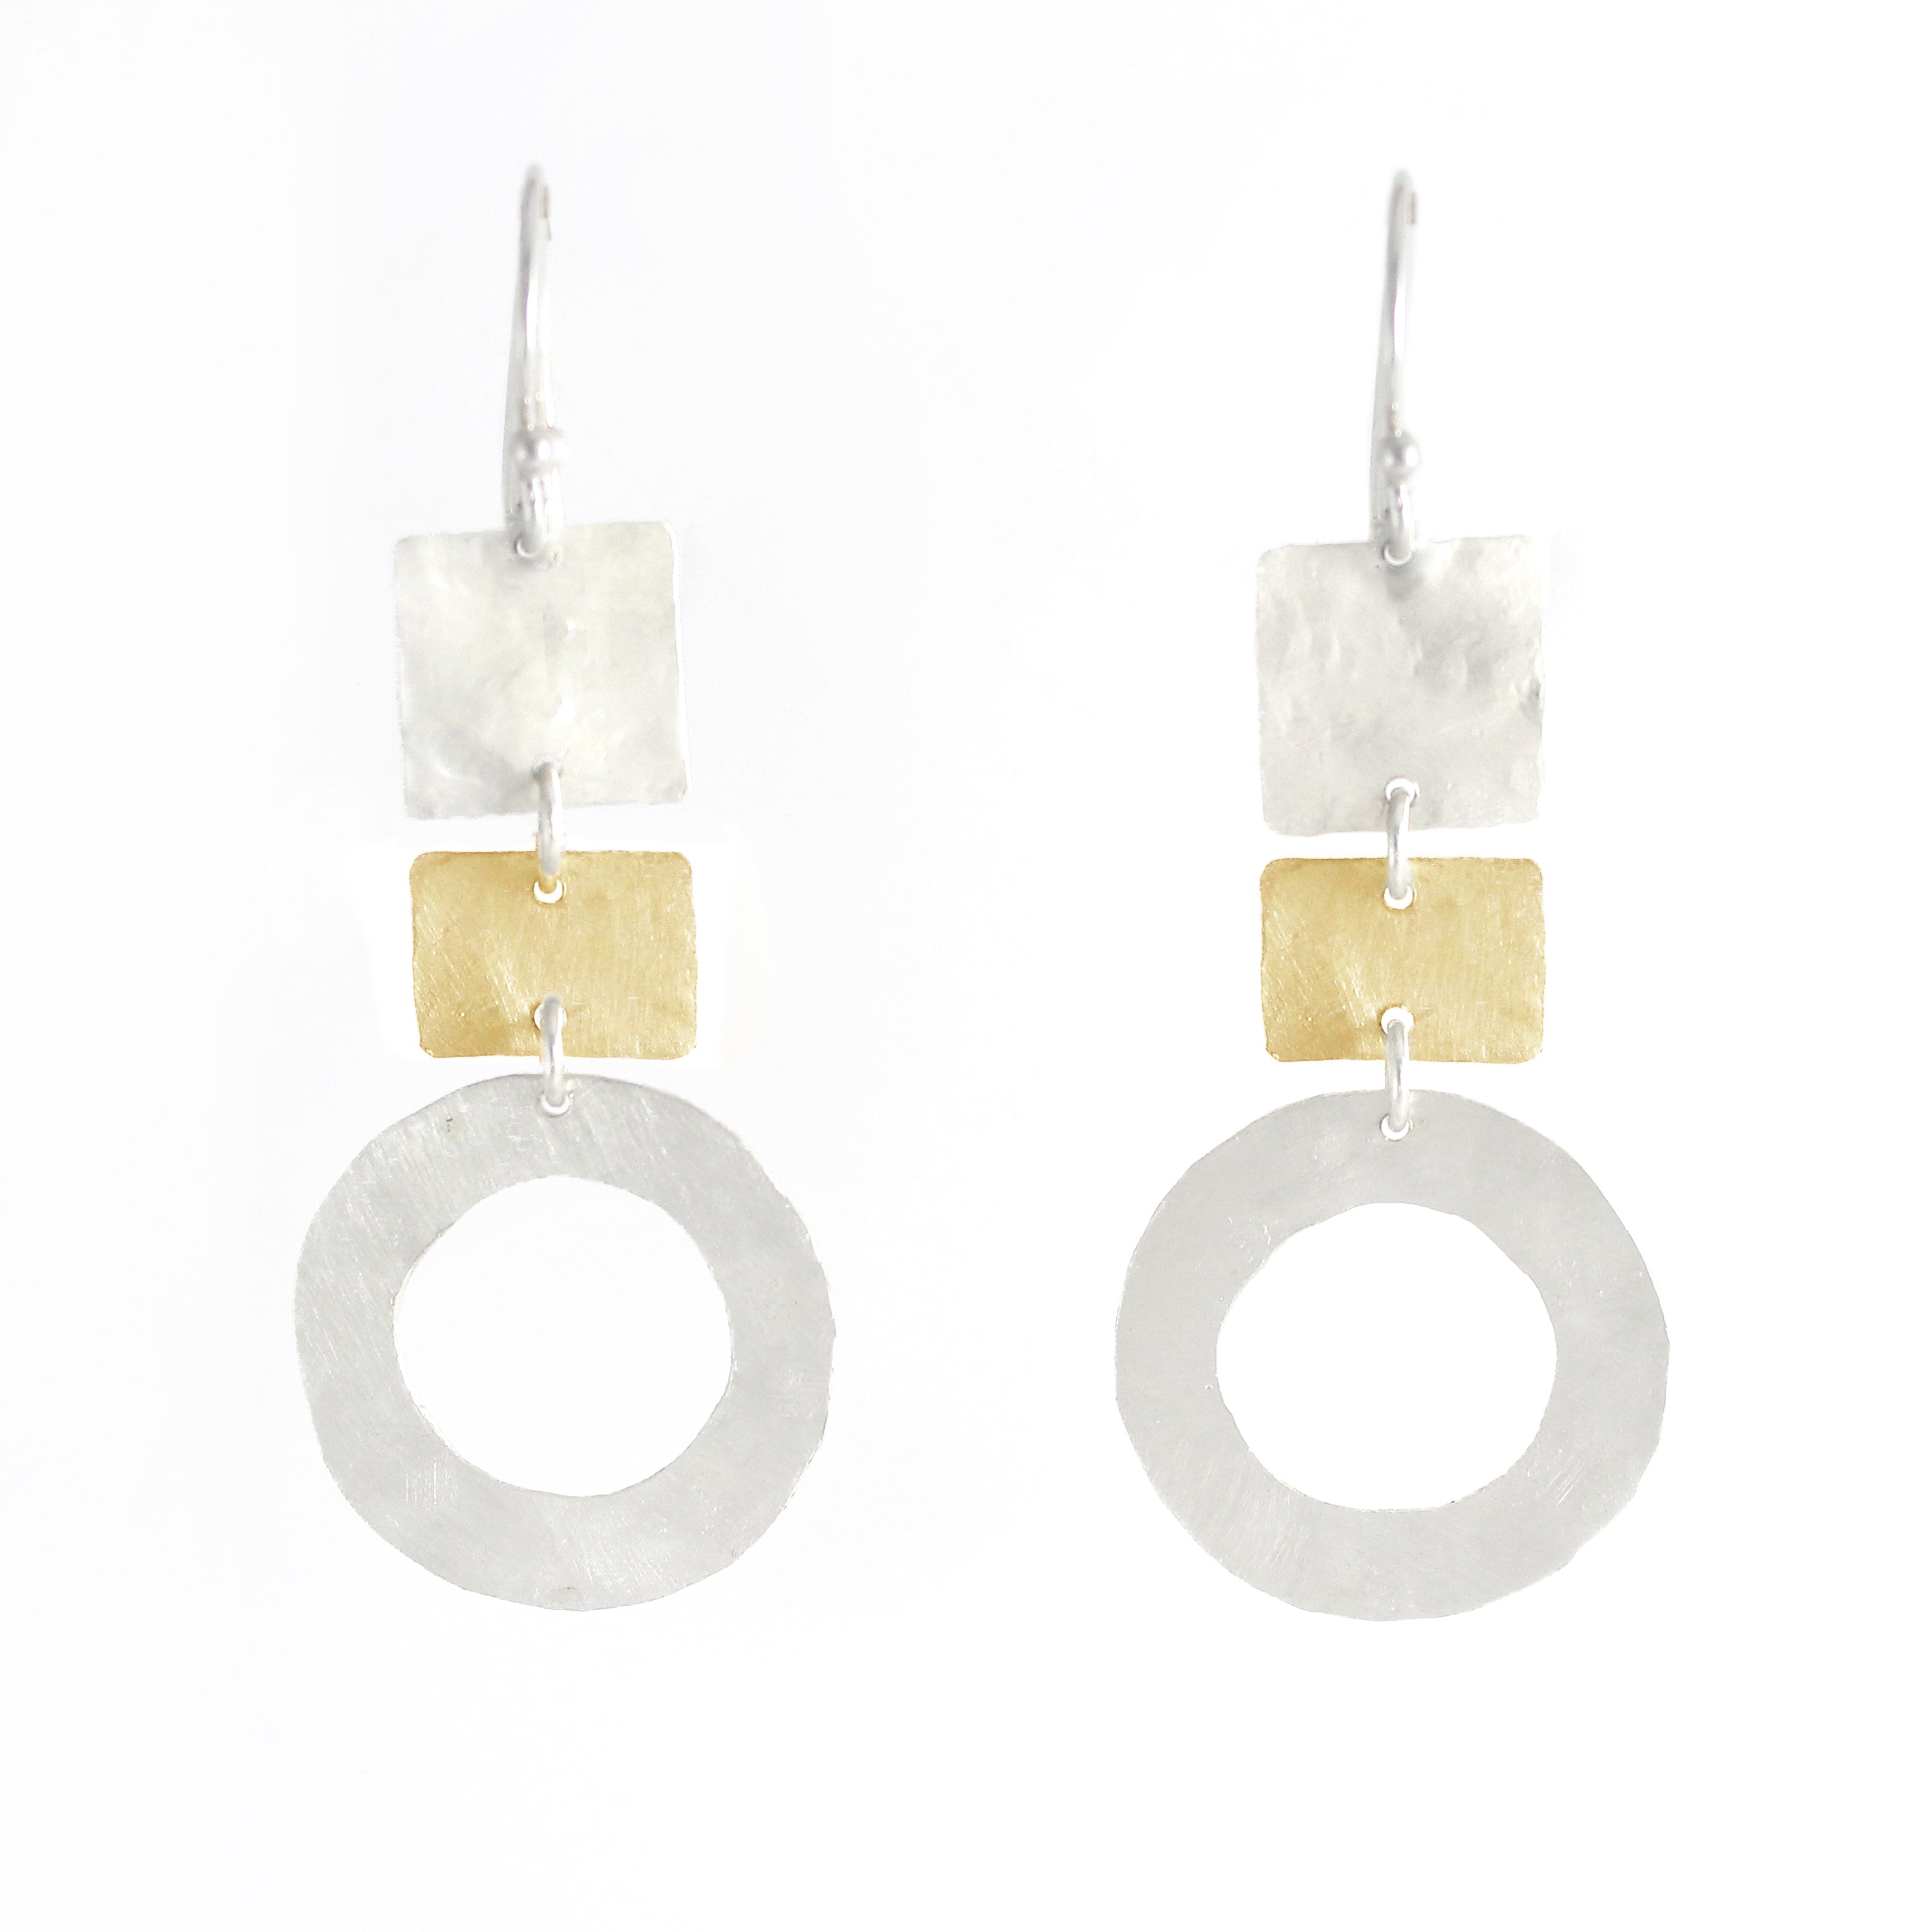 Ancient Egyptian Earrings (Gold filled/Silver) - Shulamit Kanter